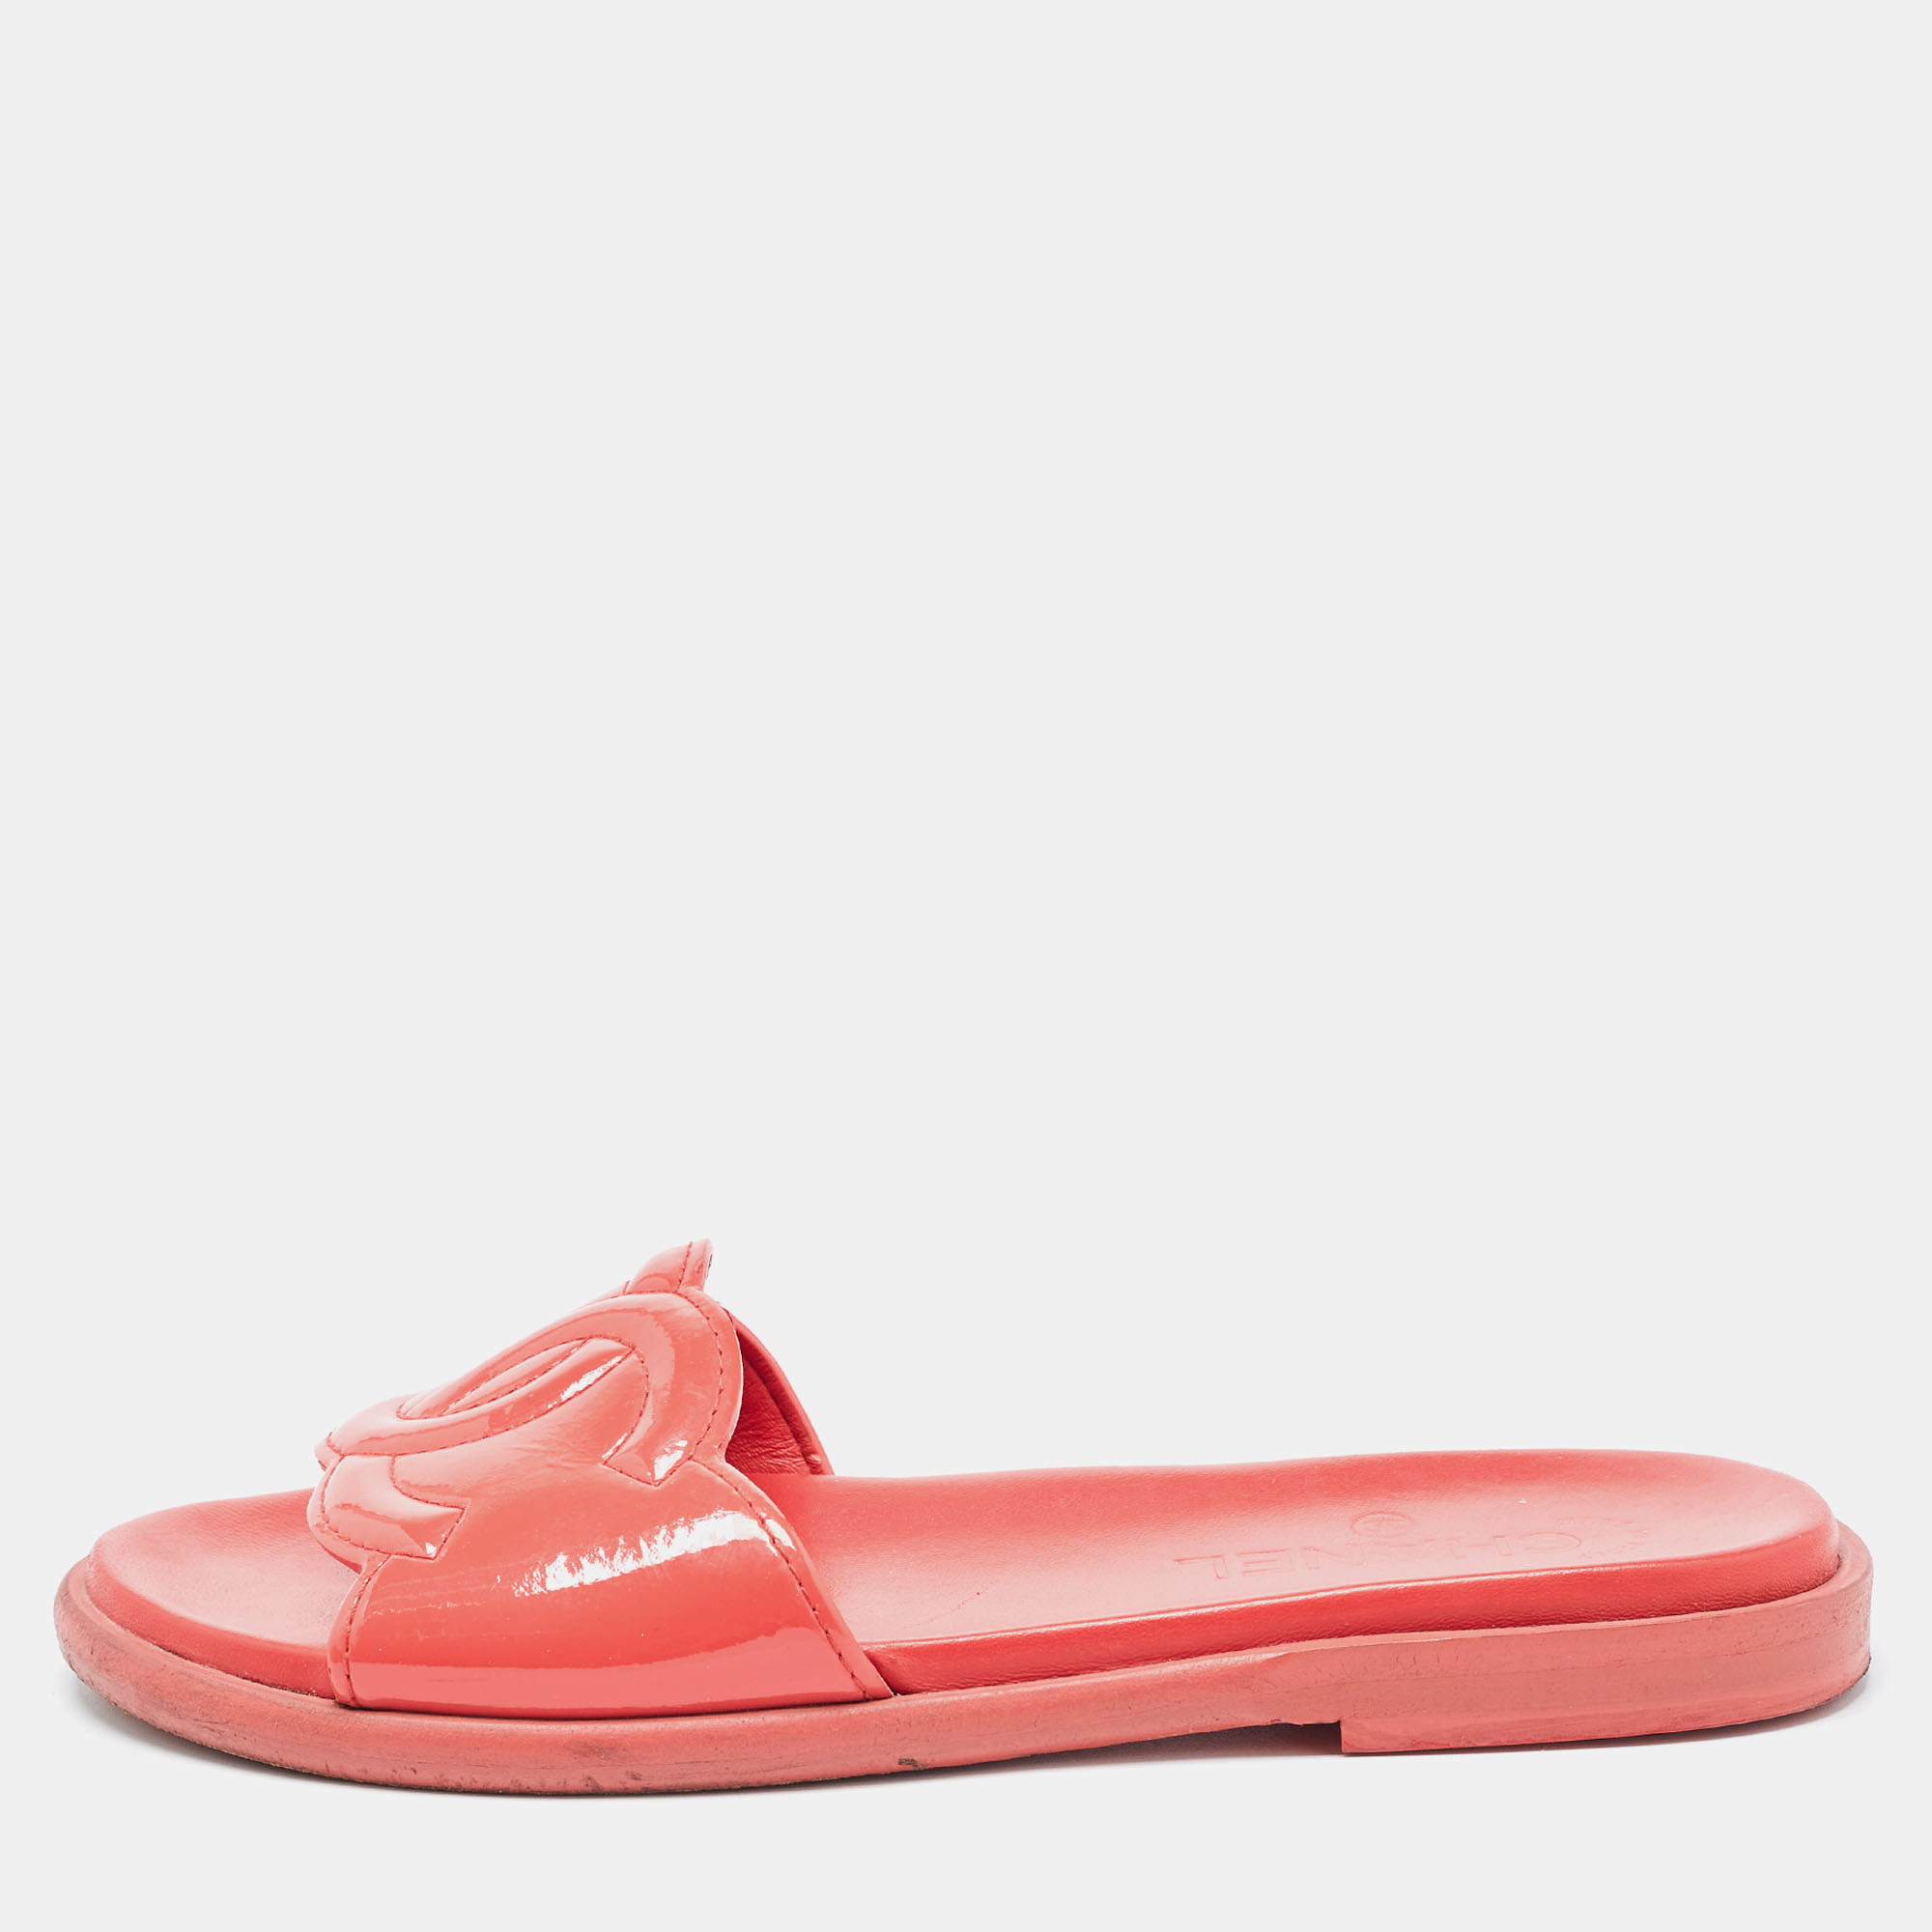 Pre-owned Chanel Red Patent Leather Cc Slides Size 37